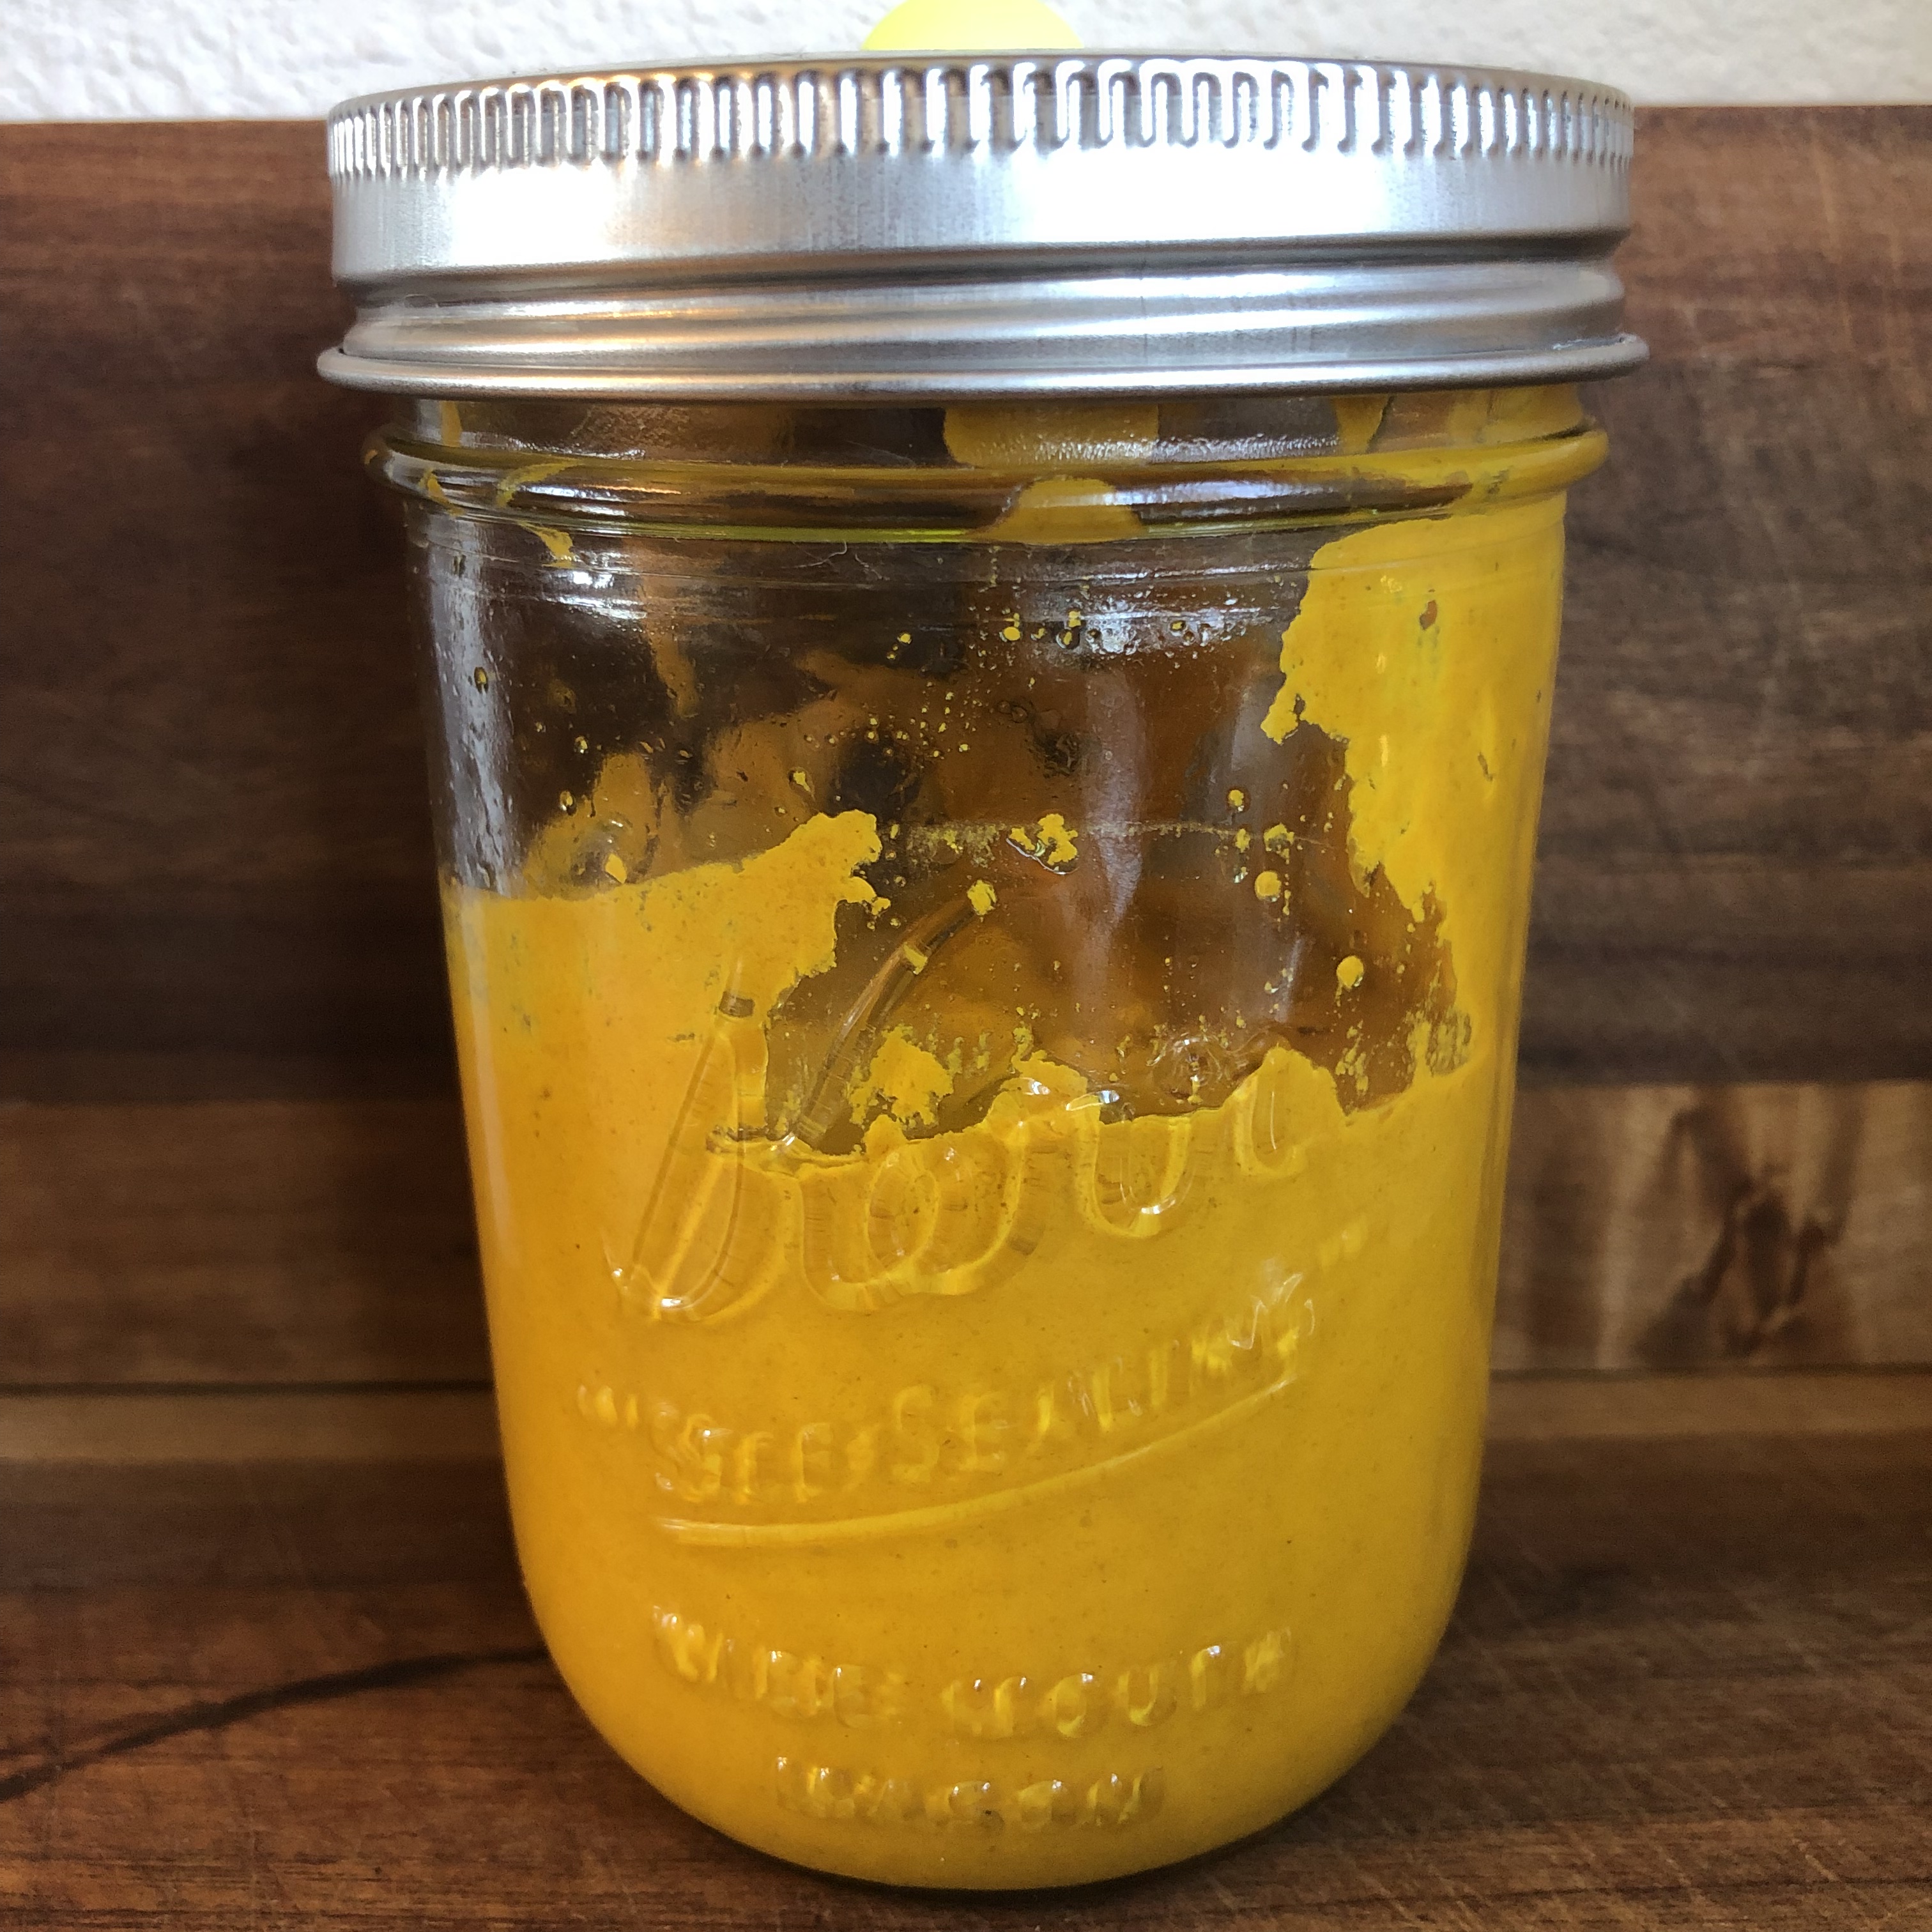 Cultured English Style Mustard (Spicy Yellow Mustard)